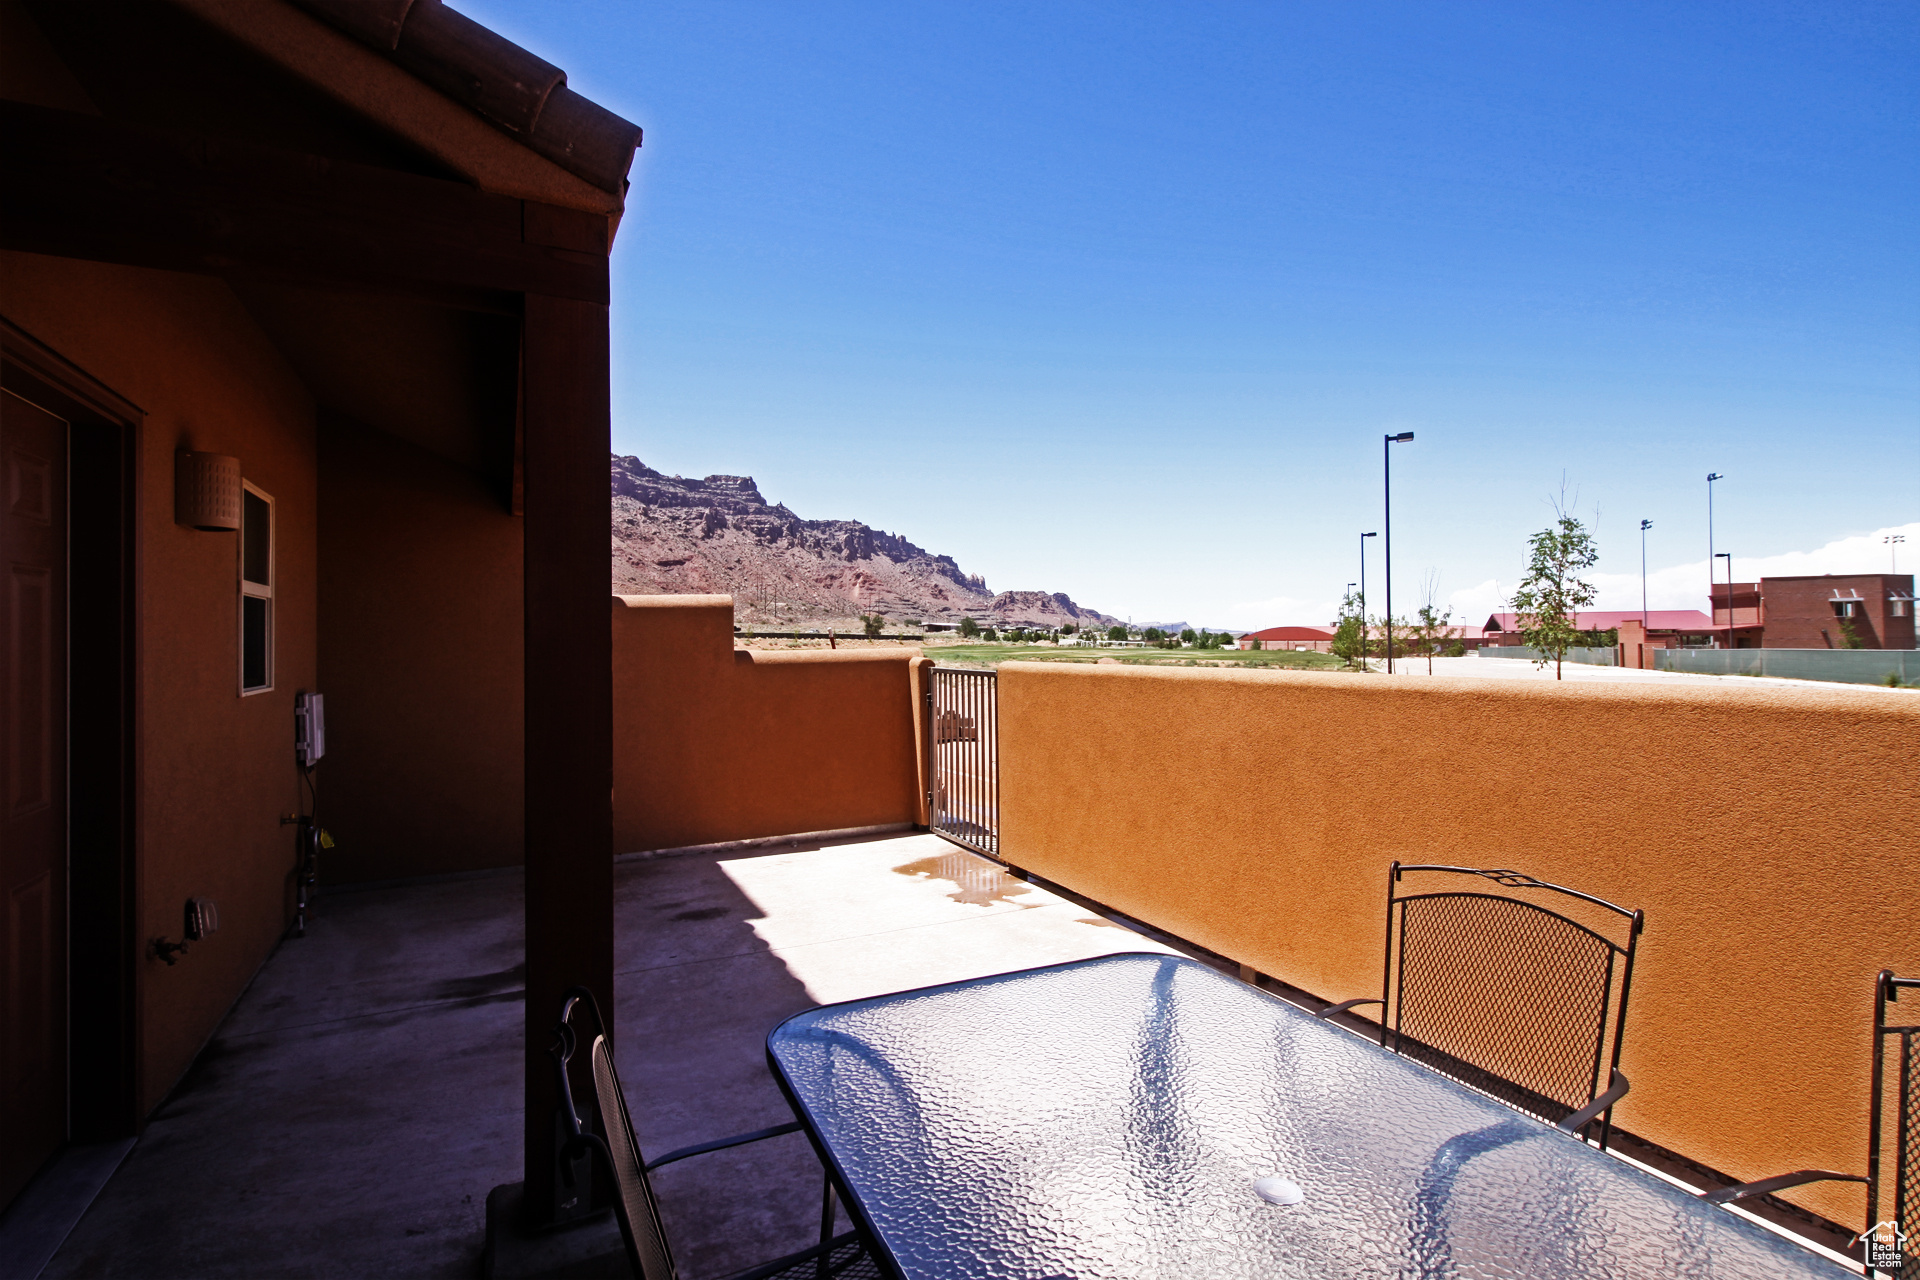 3853 S RED VALLEY #13A3, Moab, Utah 84532, 2 Bedrooms Bedrooms, 9 Rooms Rooms,2 BathroomsBathrooms,Residential,For sale,RED VALLEY,1986585